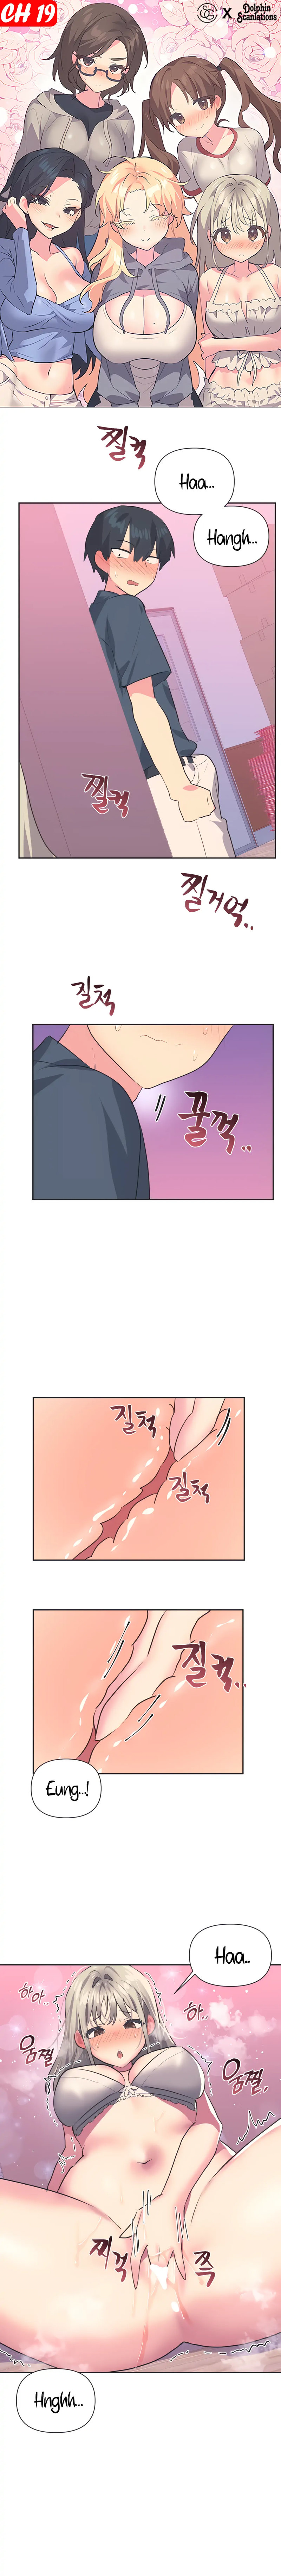 Idol’s Mating - Chapter 19 Page 1